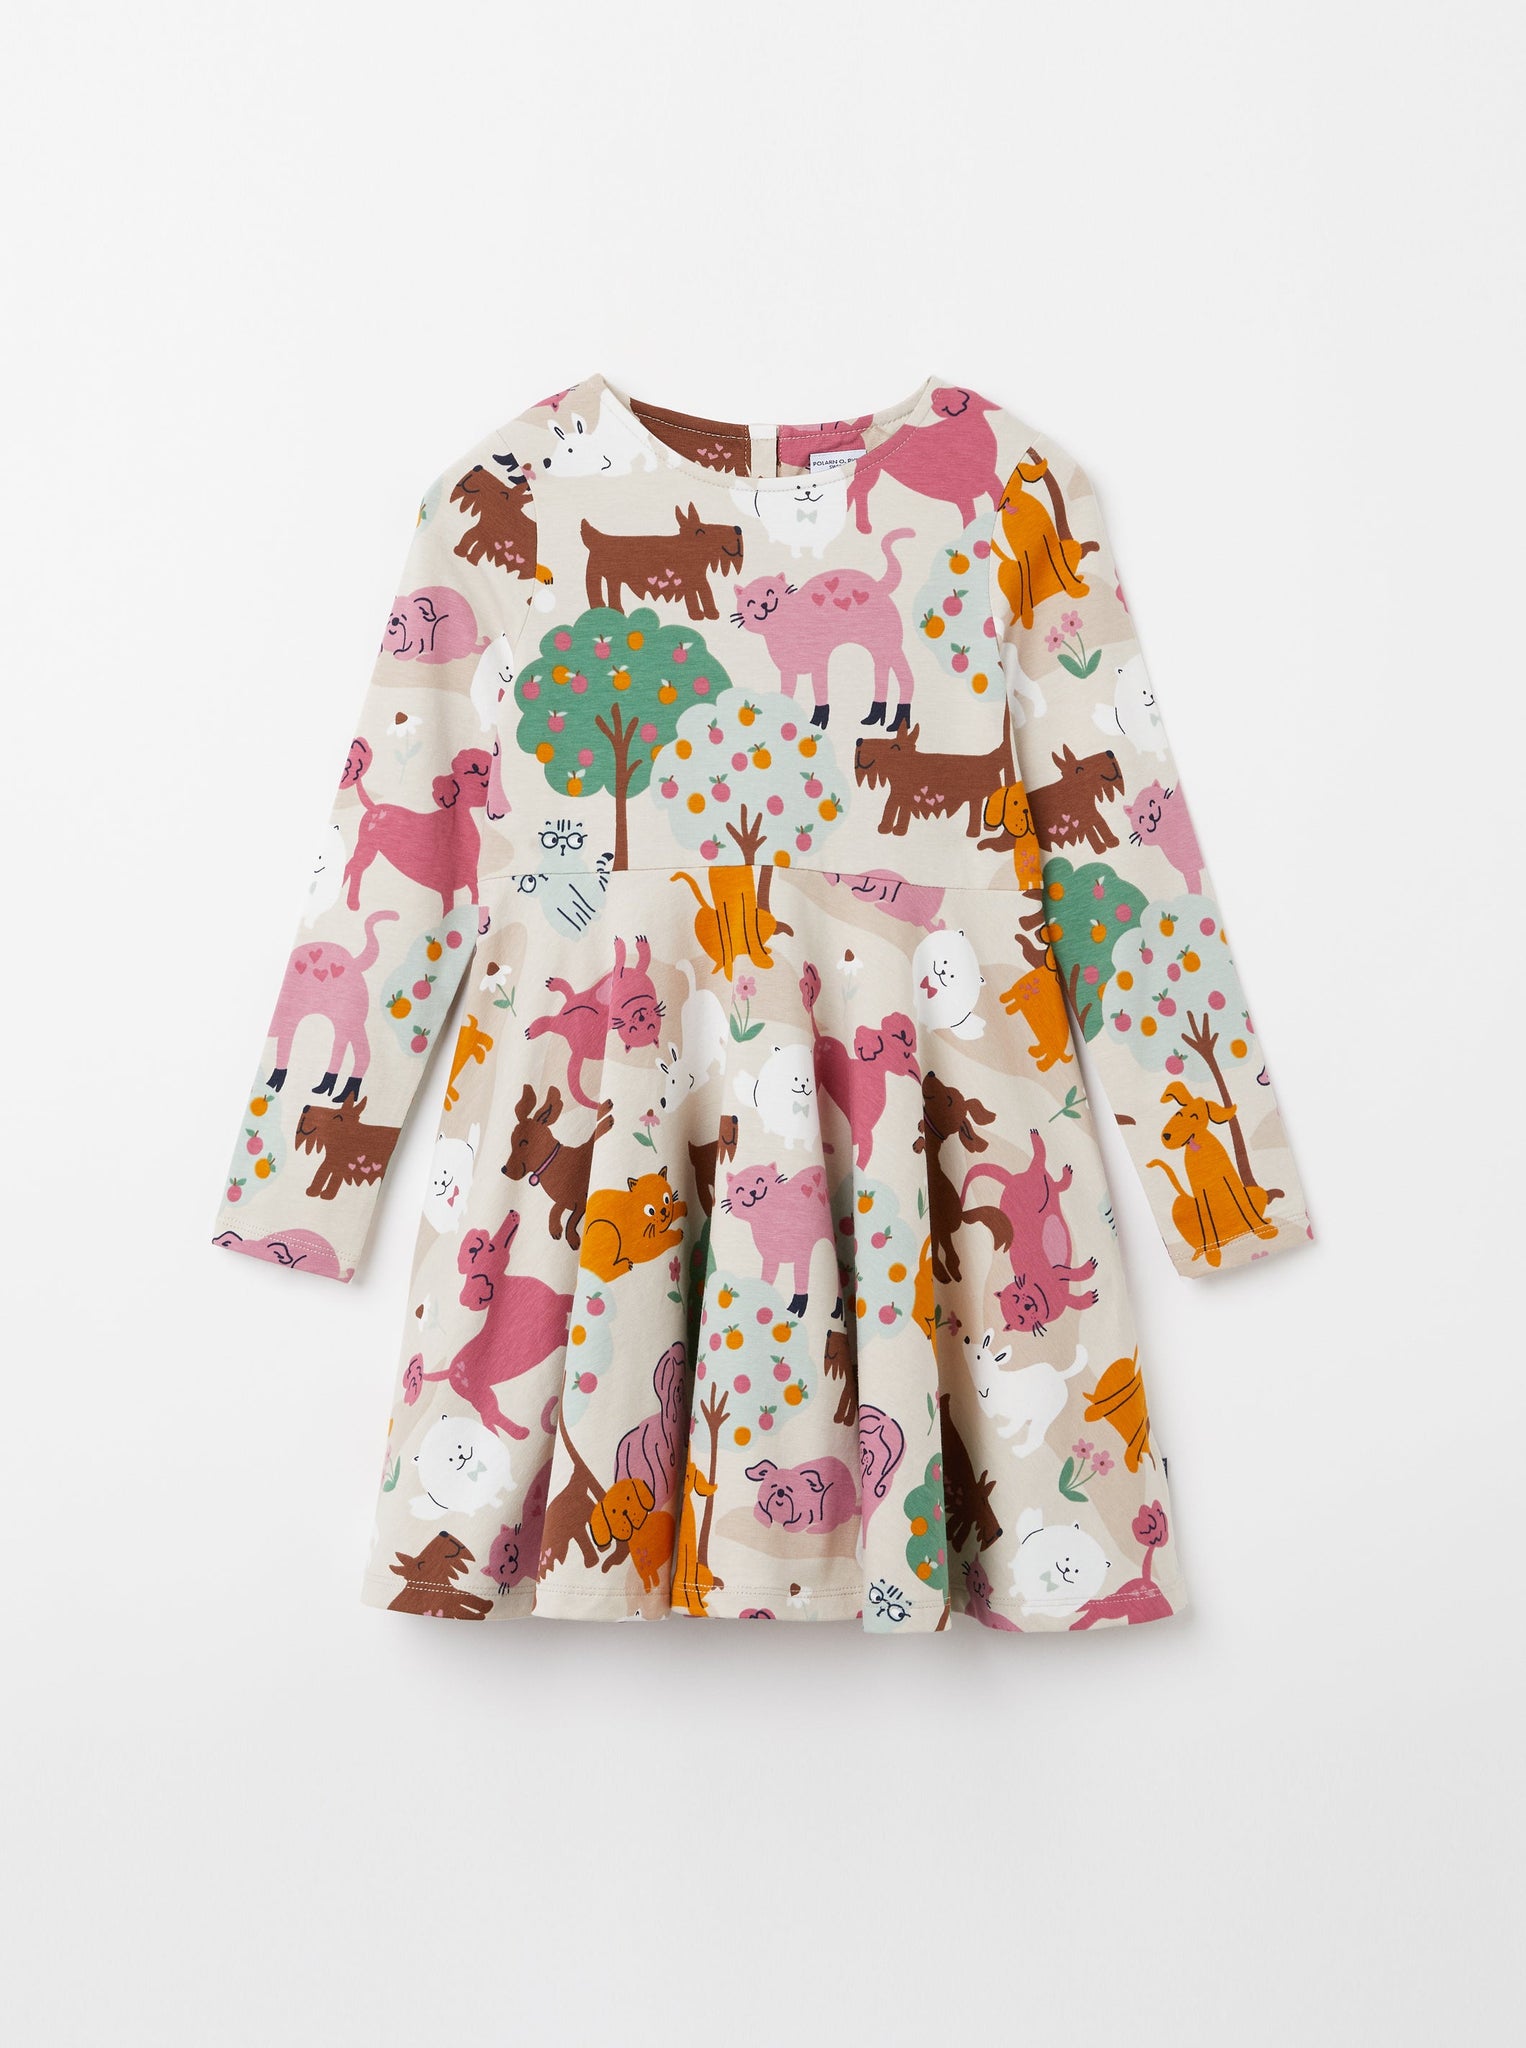 Cat & Dog Print Beige Kids Dress from the Polarn O. Pyret Kidswear collection. Clothes made using sustainably sourced materials.